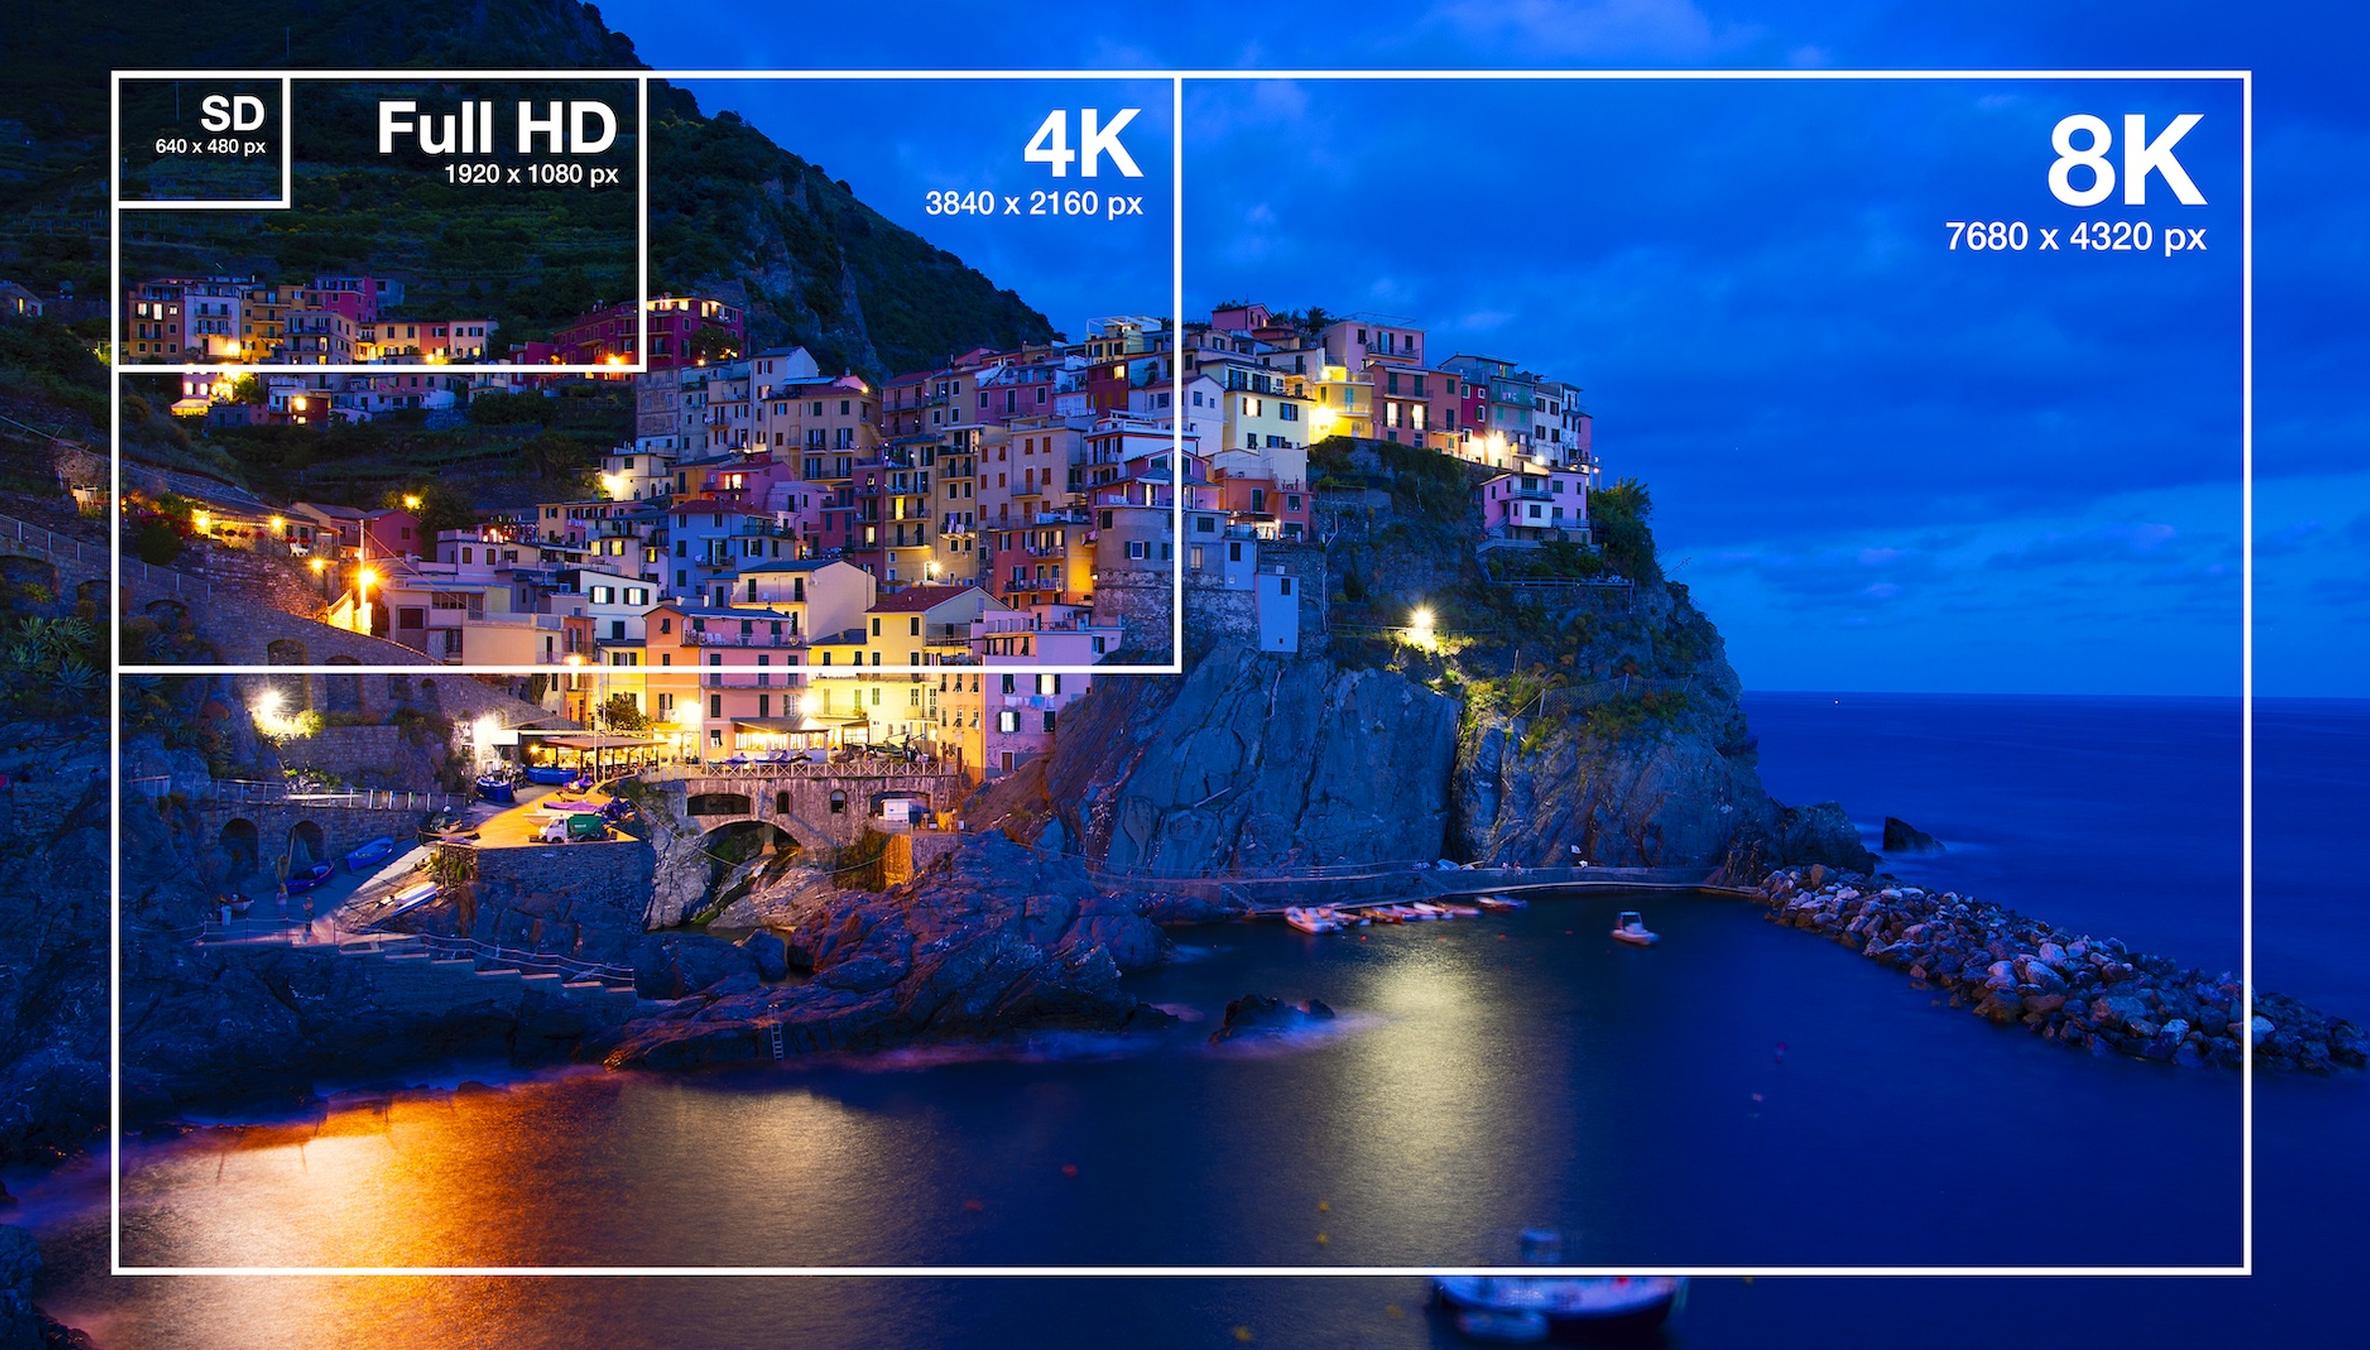 High-Resolution 4K Videos and Stock Footage - Shutterstock